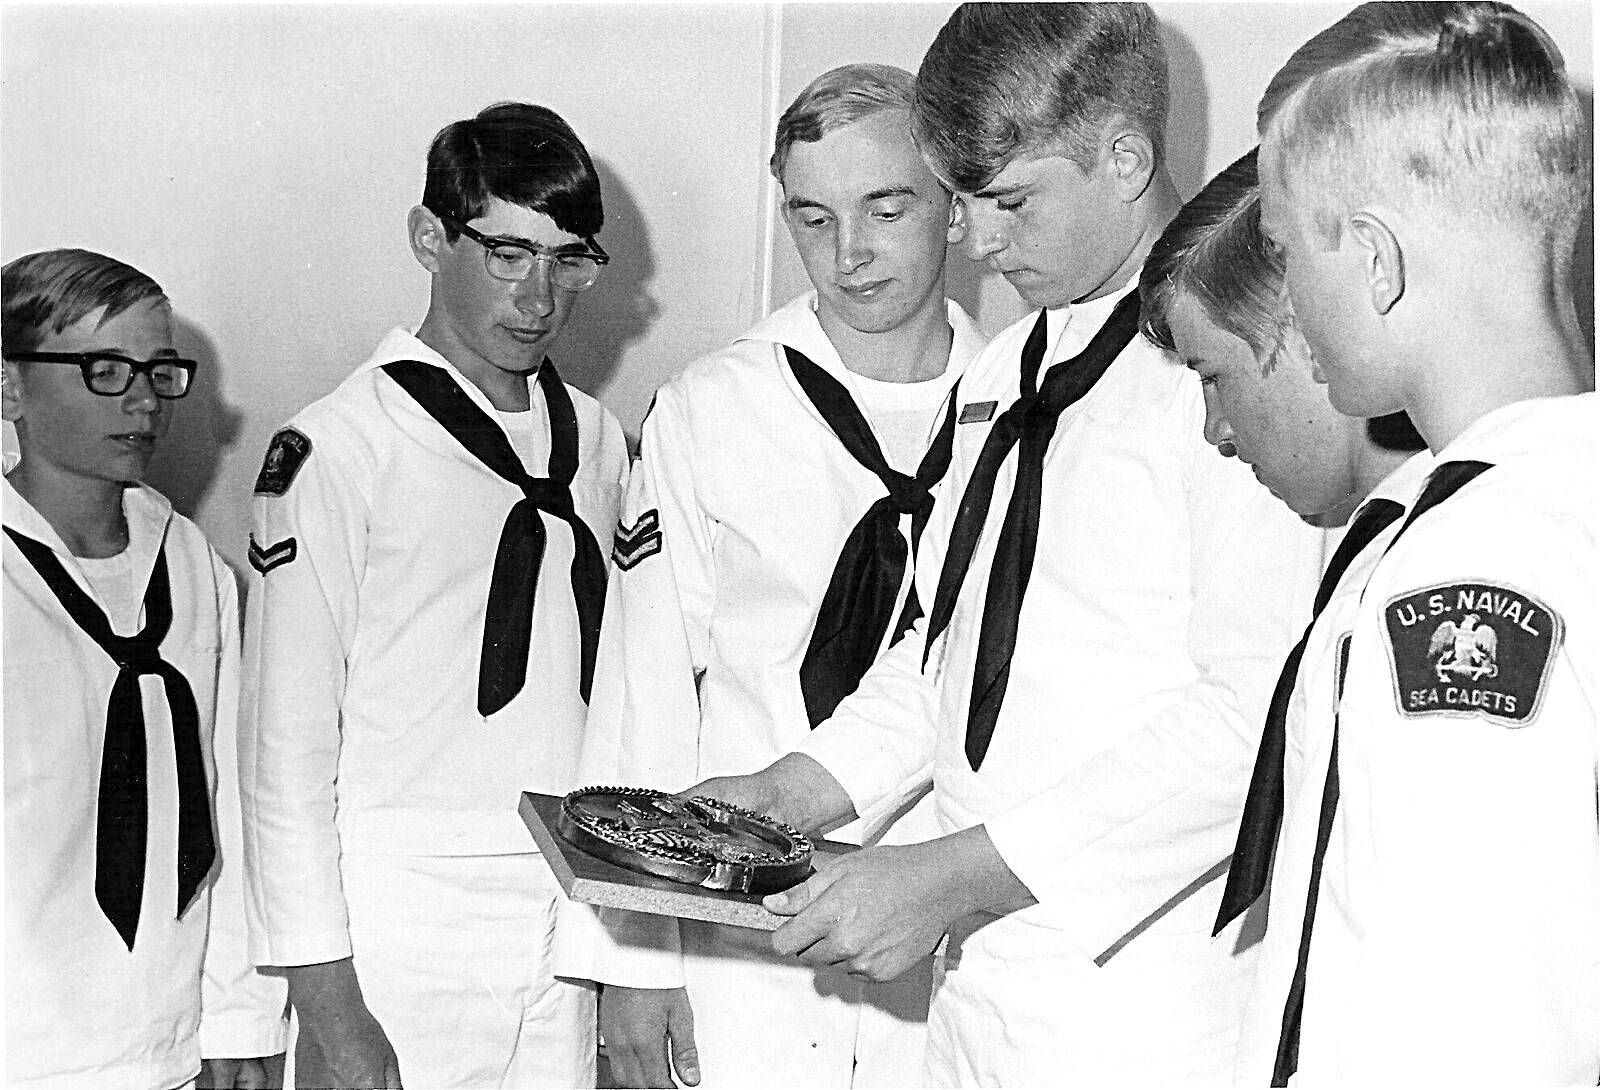 Sea cadets in the 1970s admire a trophy.